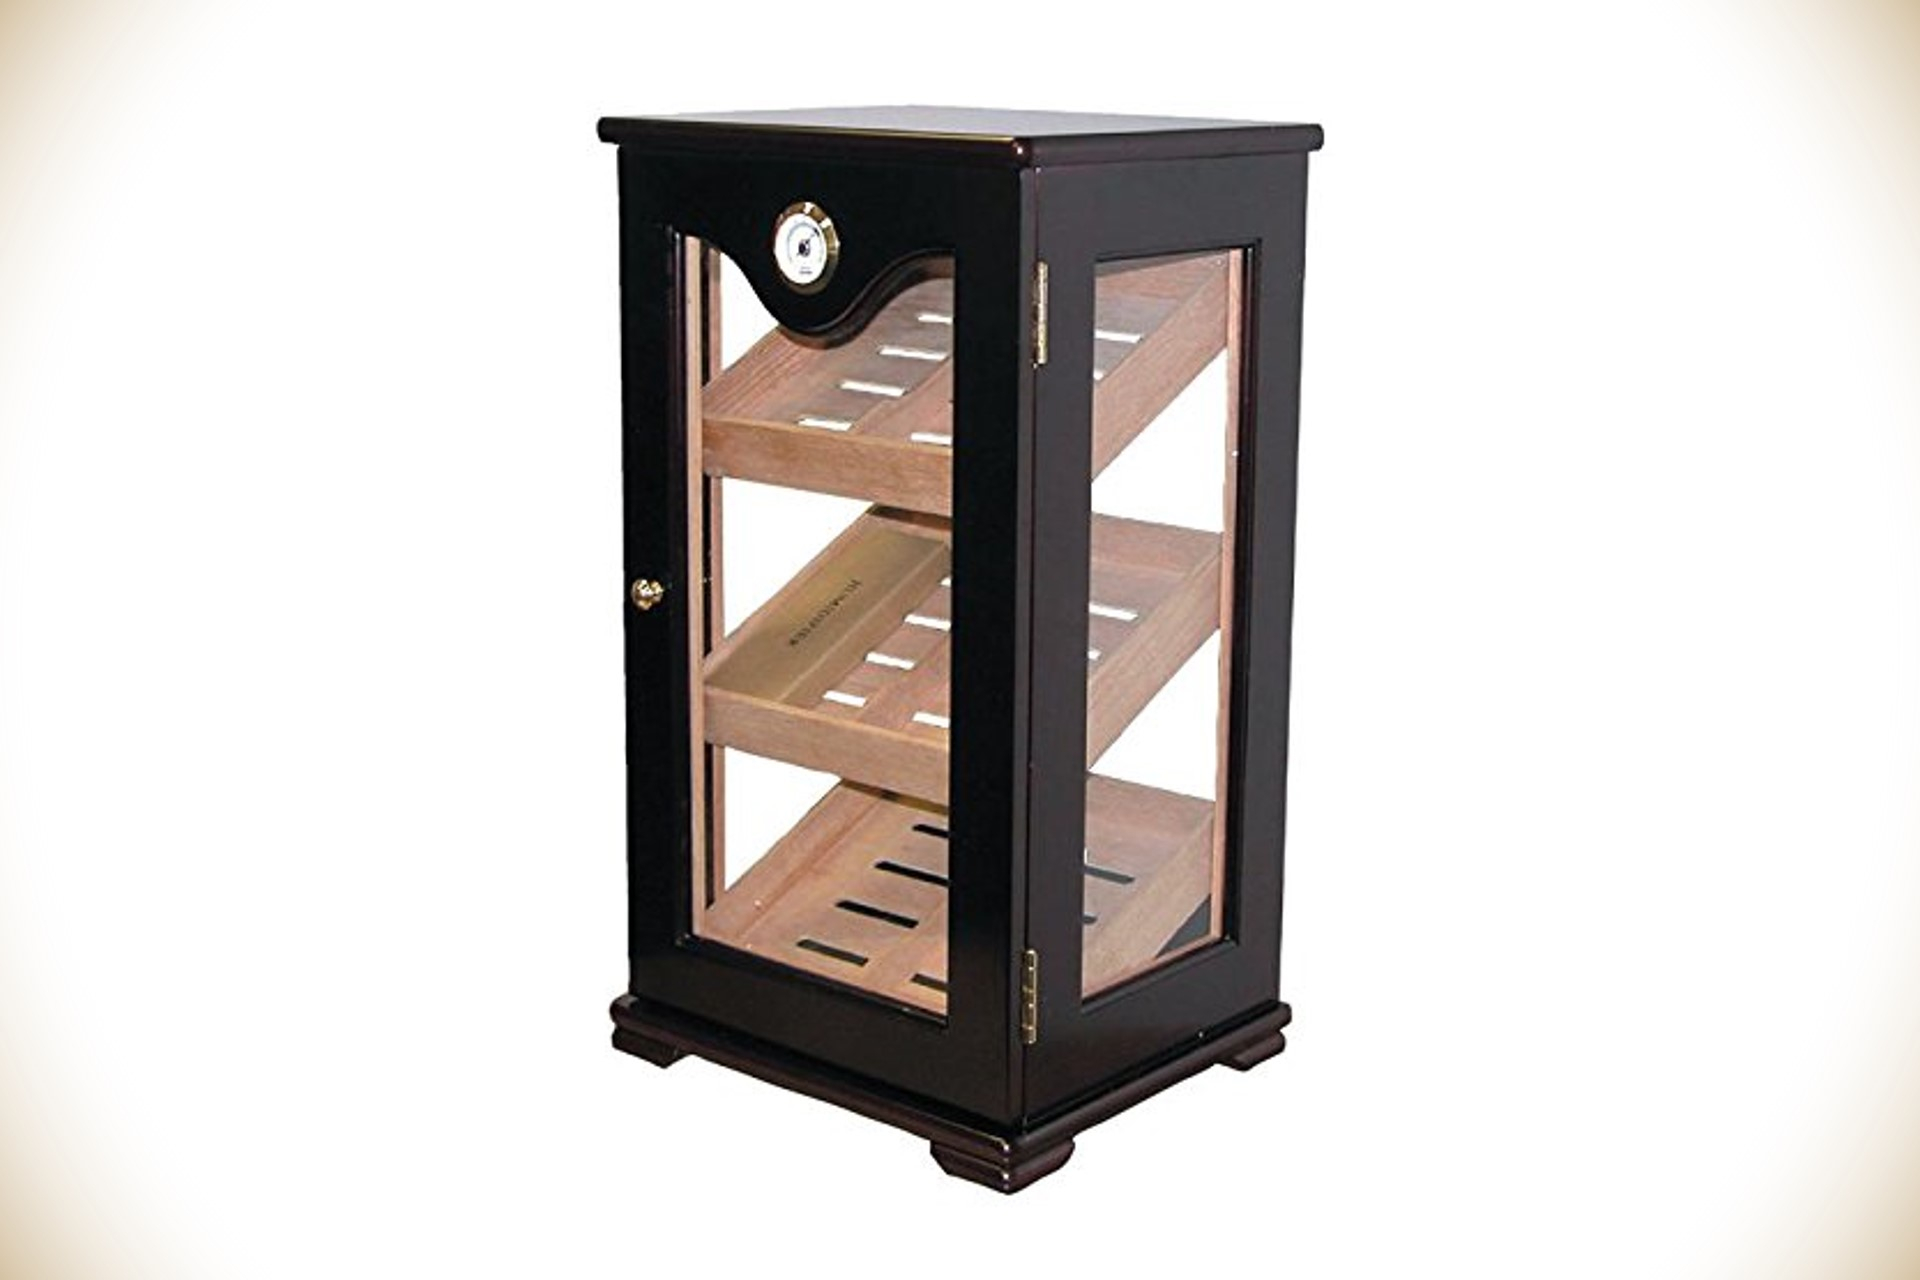 Quality Importers Upright Cabinet Humidor Bourbon Culture intended for sizing 1920 X 1280